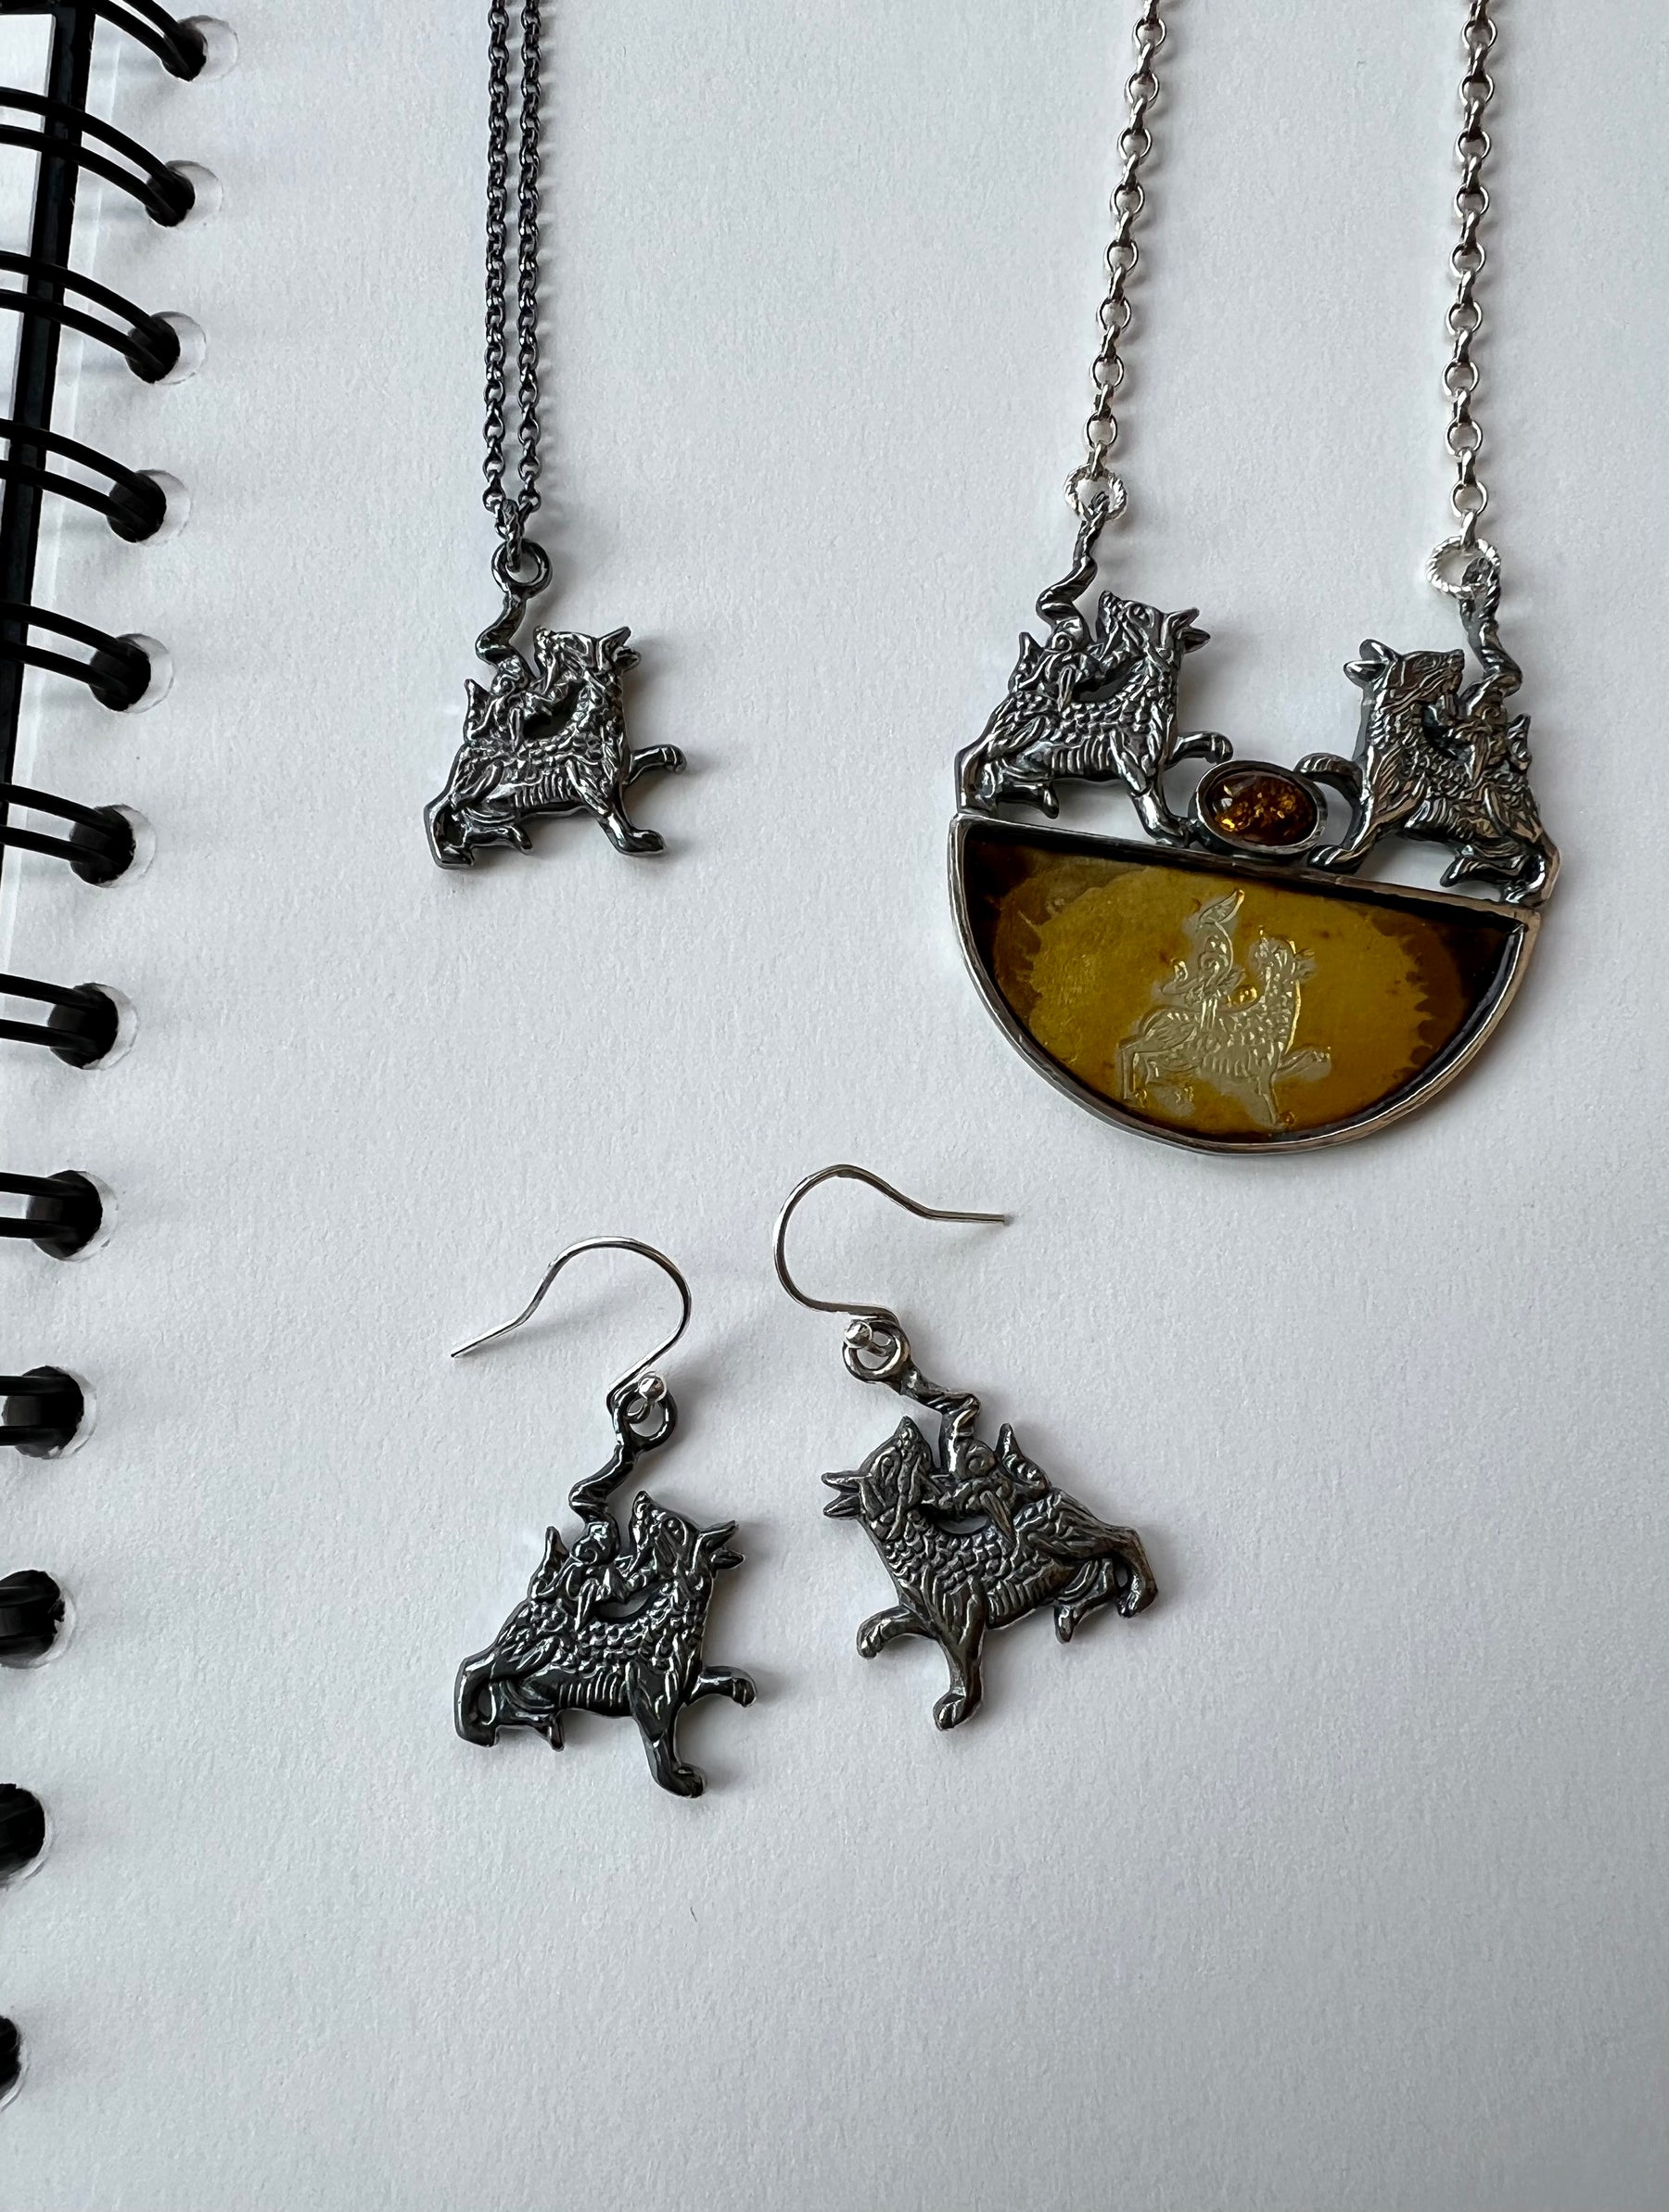 The Maeshowe Dragon necklace